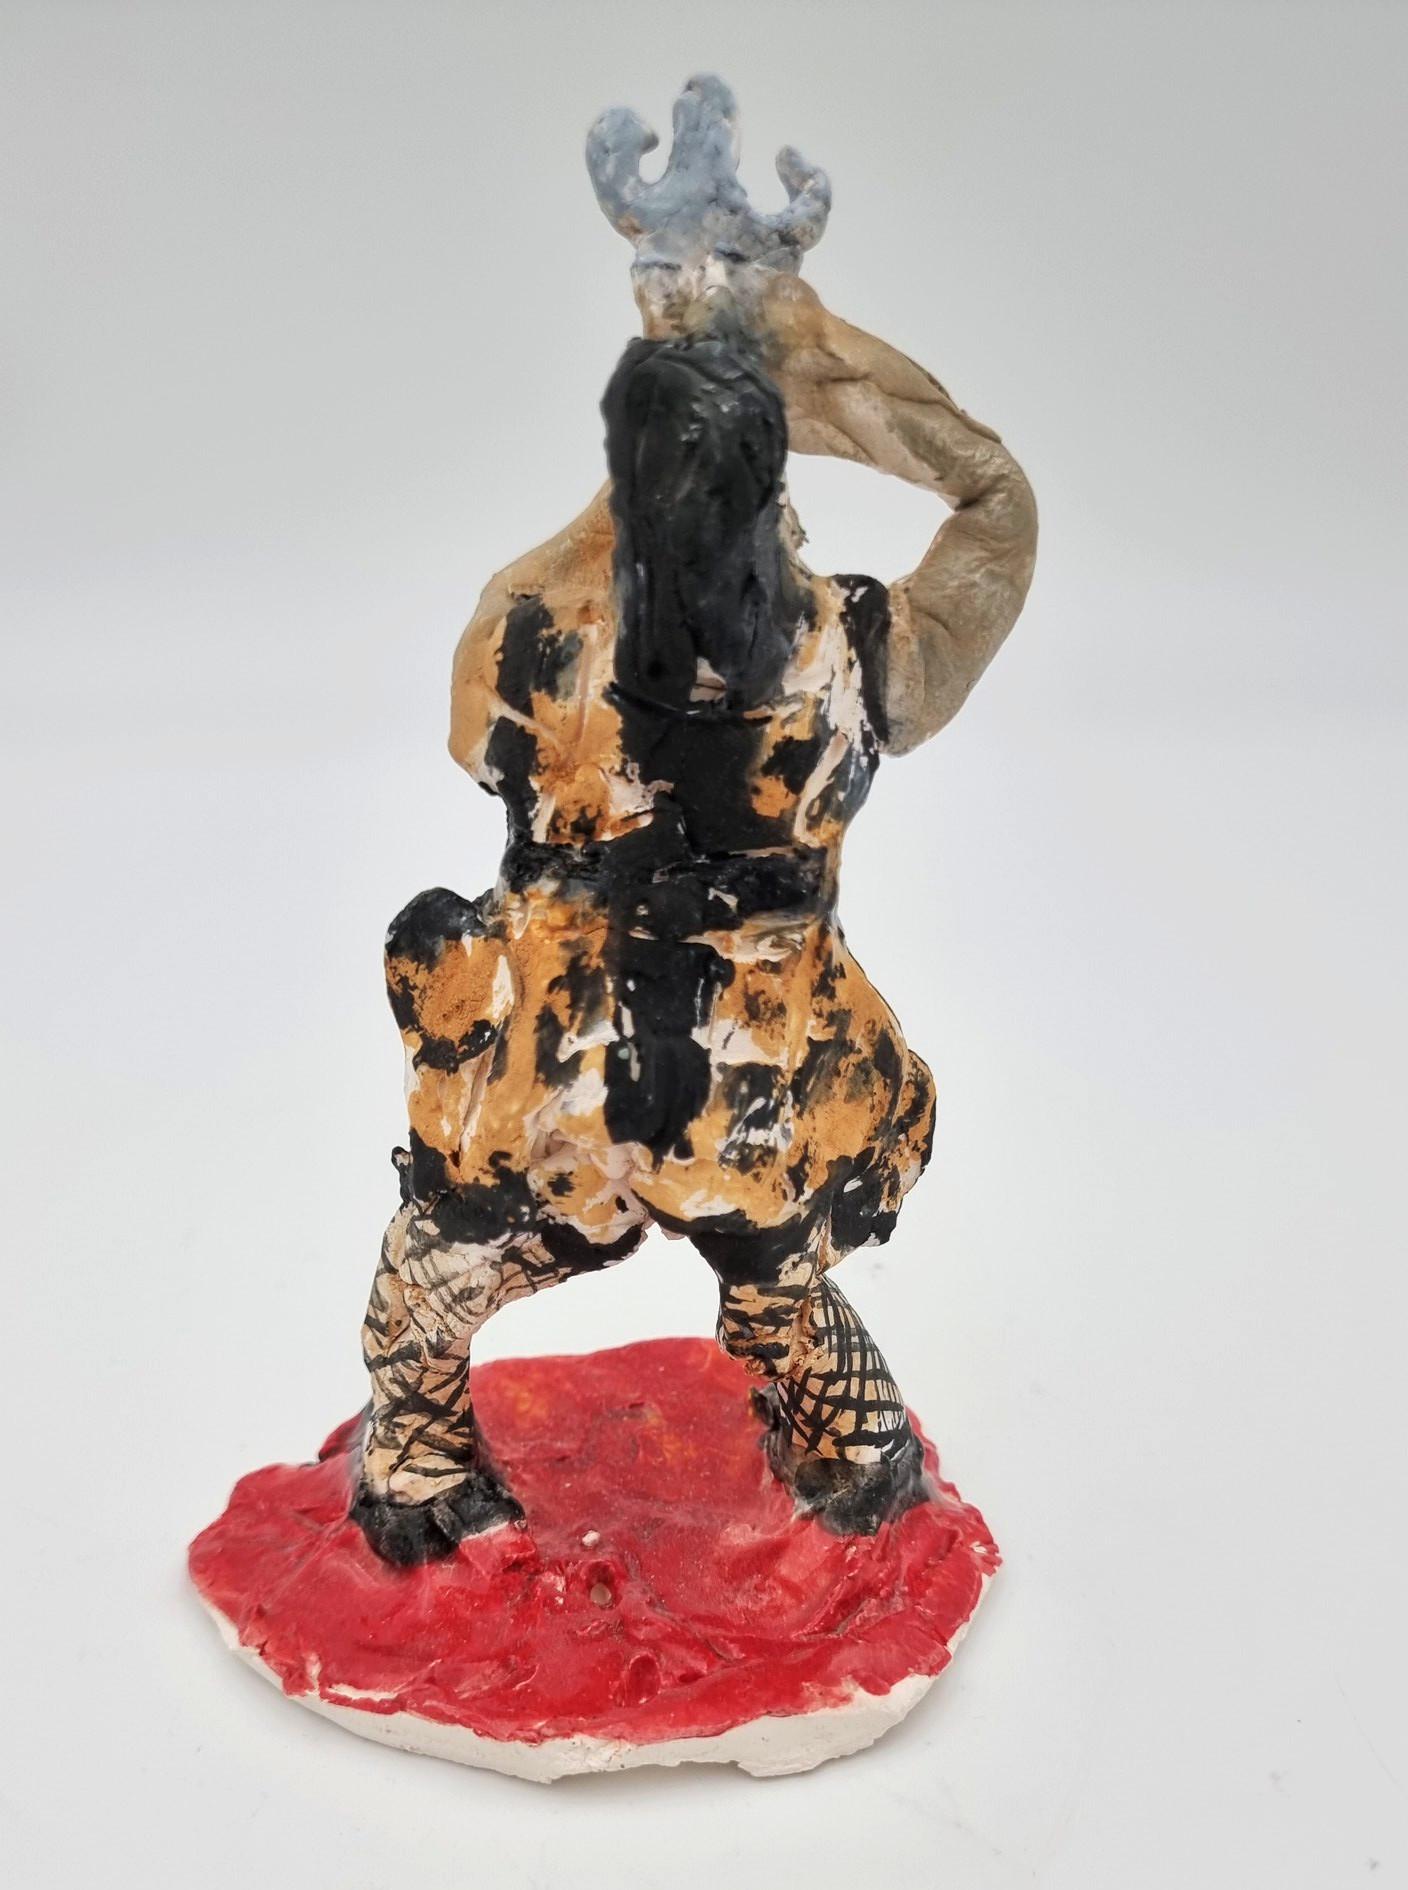 Sword Swallower (Circus, Whimsical, Viola Frey, Delicate, Playful, Fun, Ringling - Contemporary Sculpture by Ann Rothman